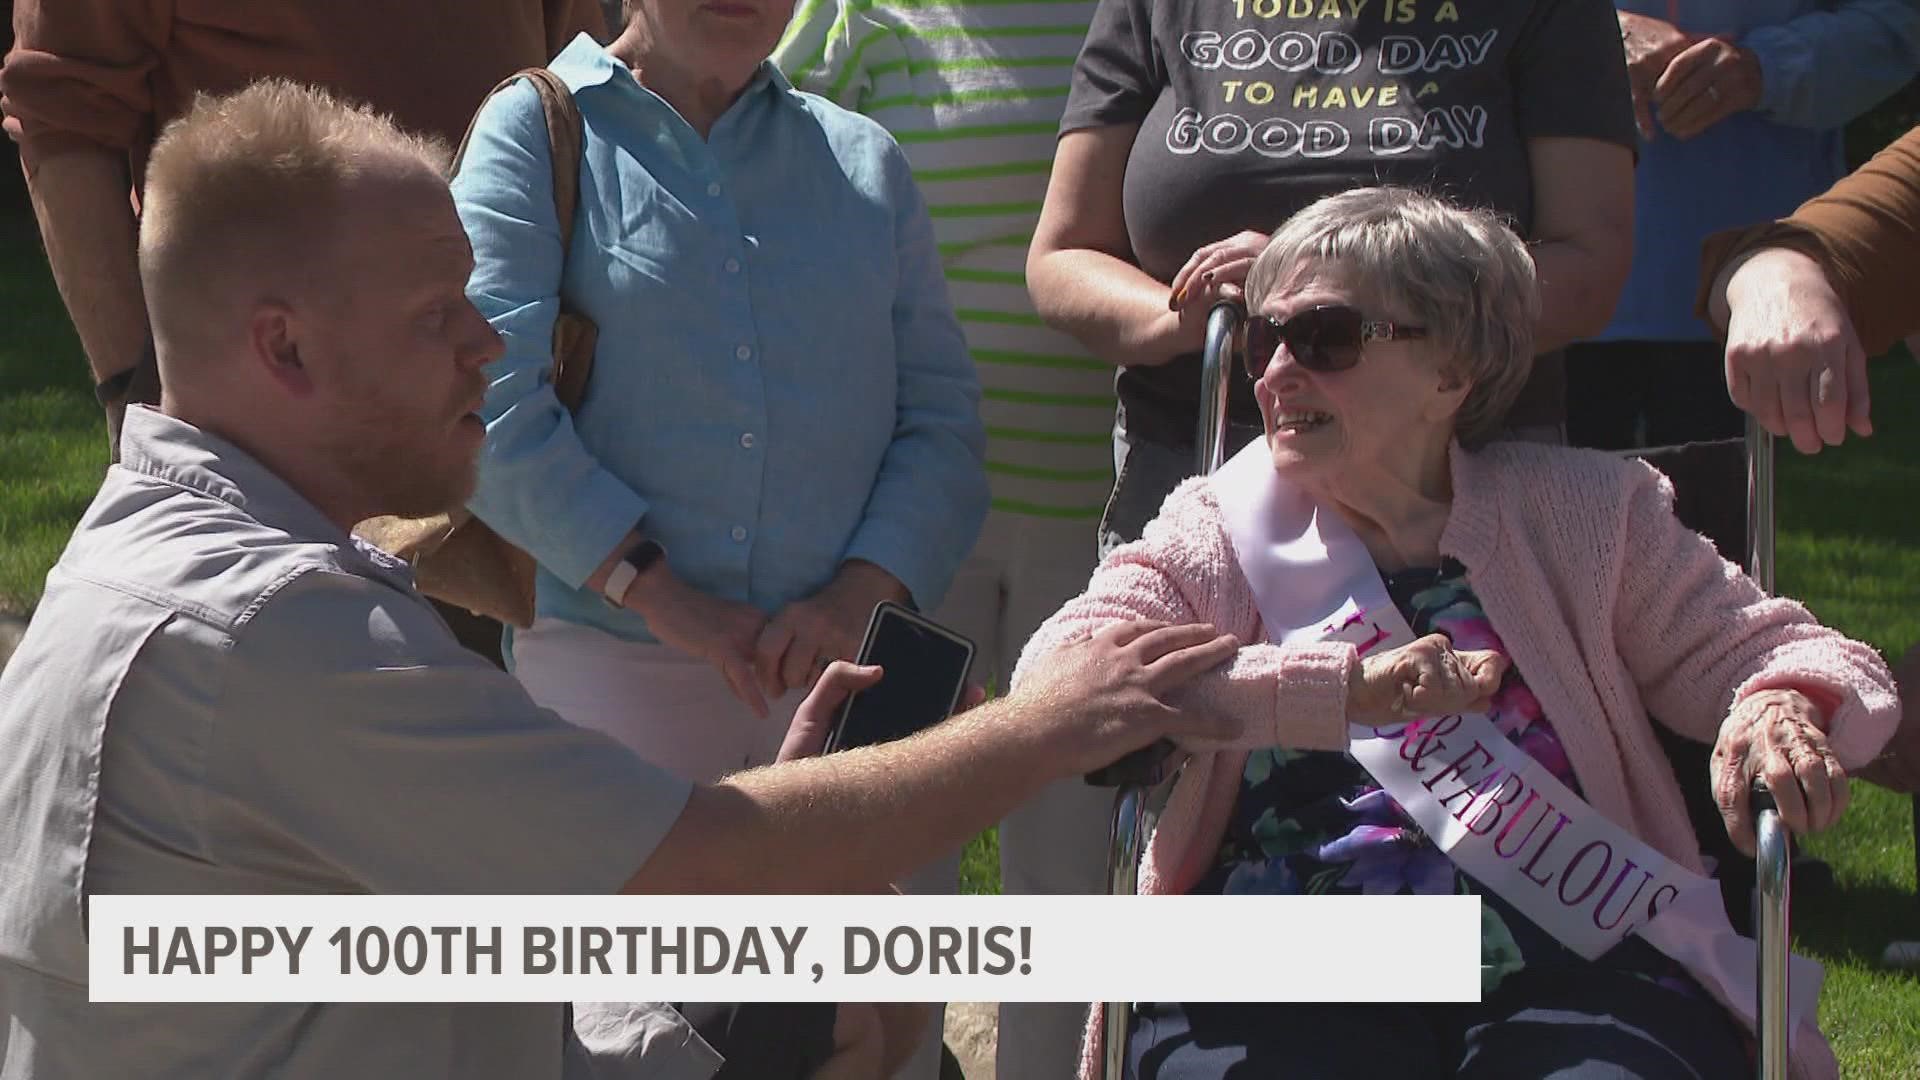 Quite a party for Doris today... Will Local 5 photojournalist Mike Simmons be invited back to her 101st birthday party next year? Watch to find out!